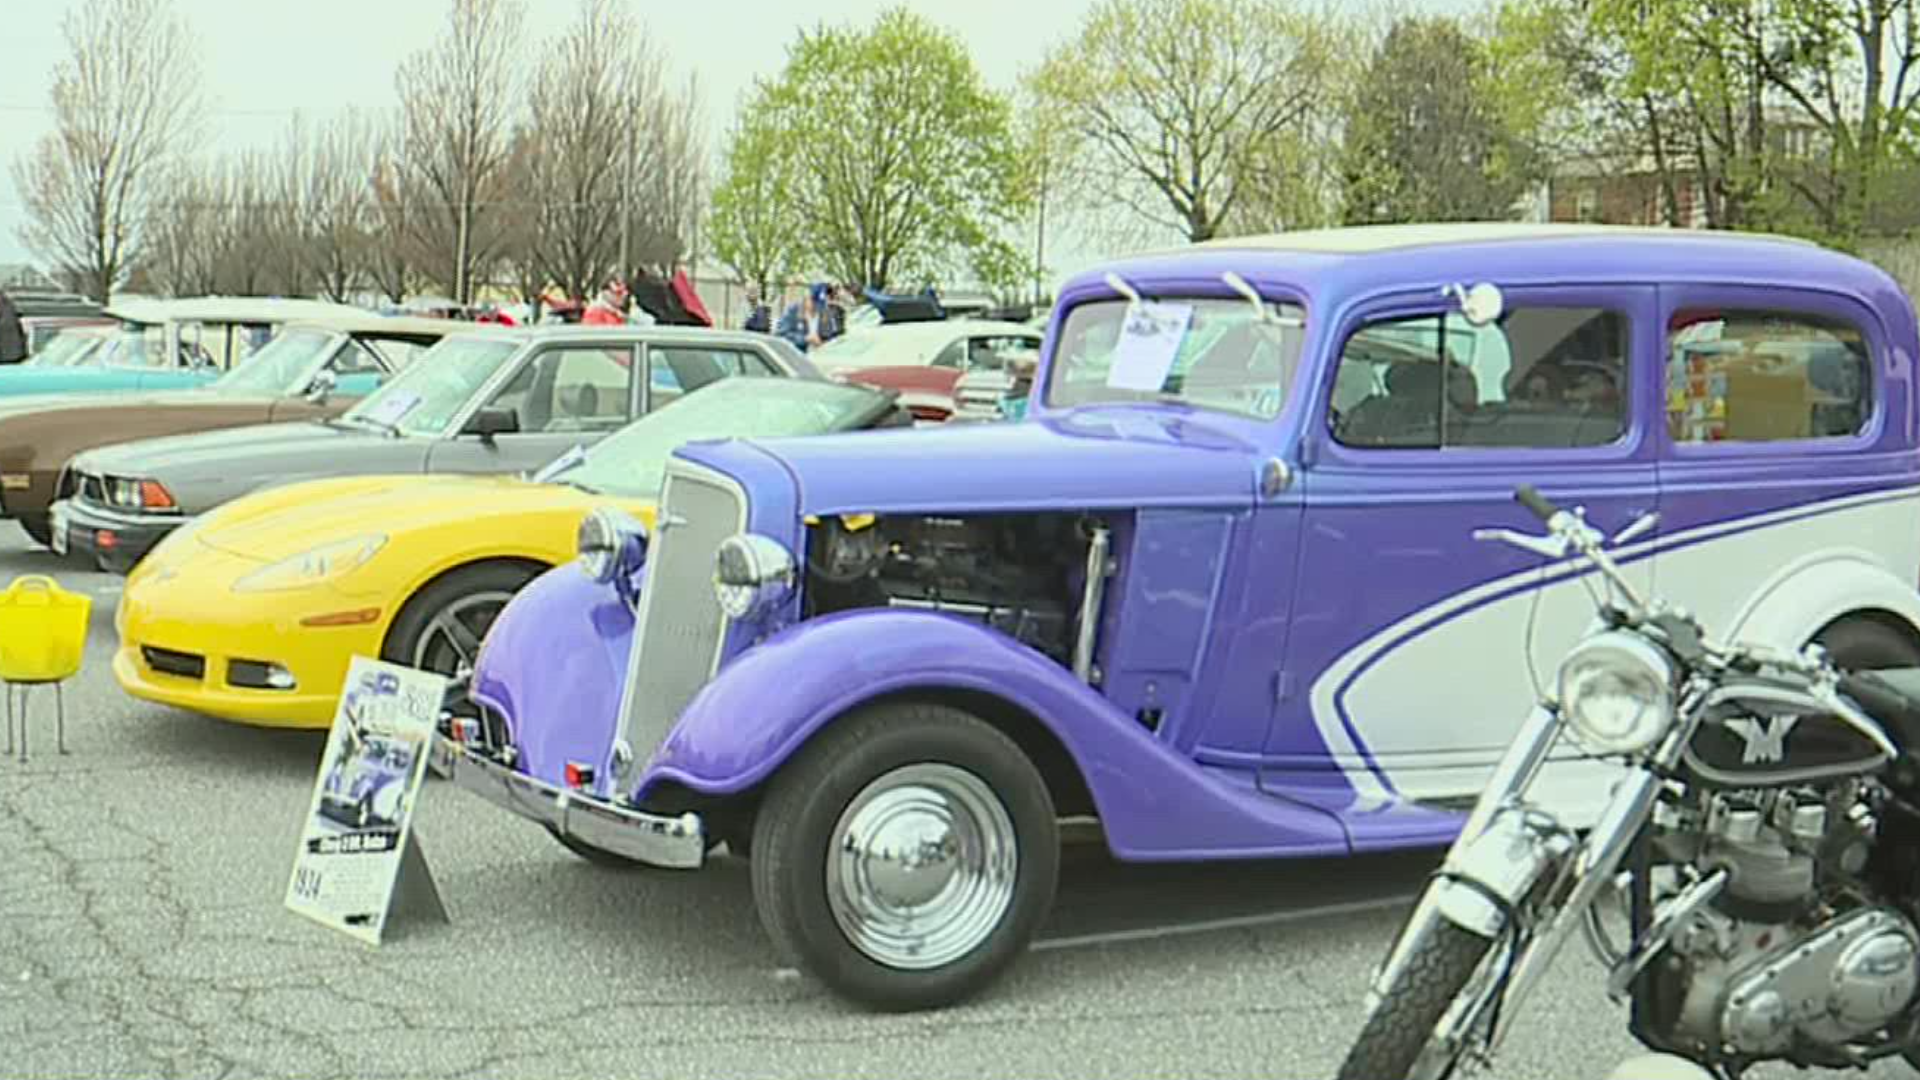 "Cruisin for Ukraine" took place in Lancaster County, raising money for the war-torn country.